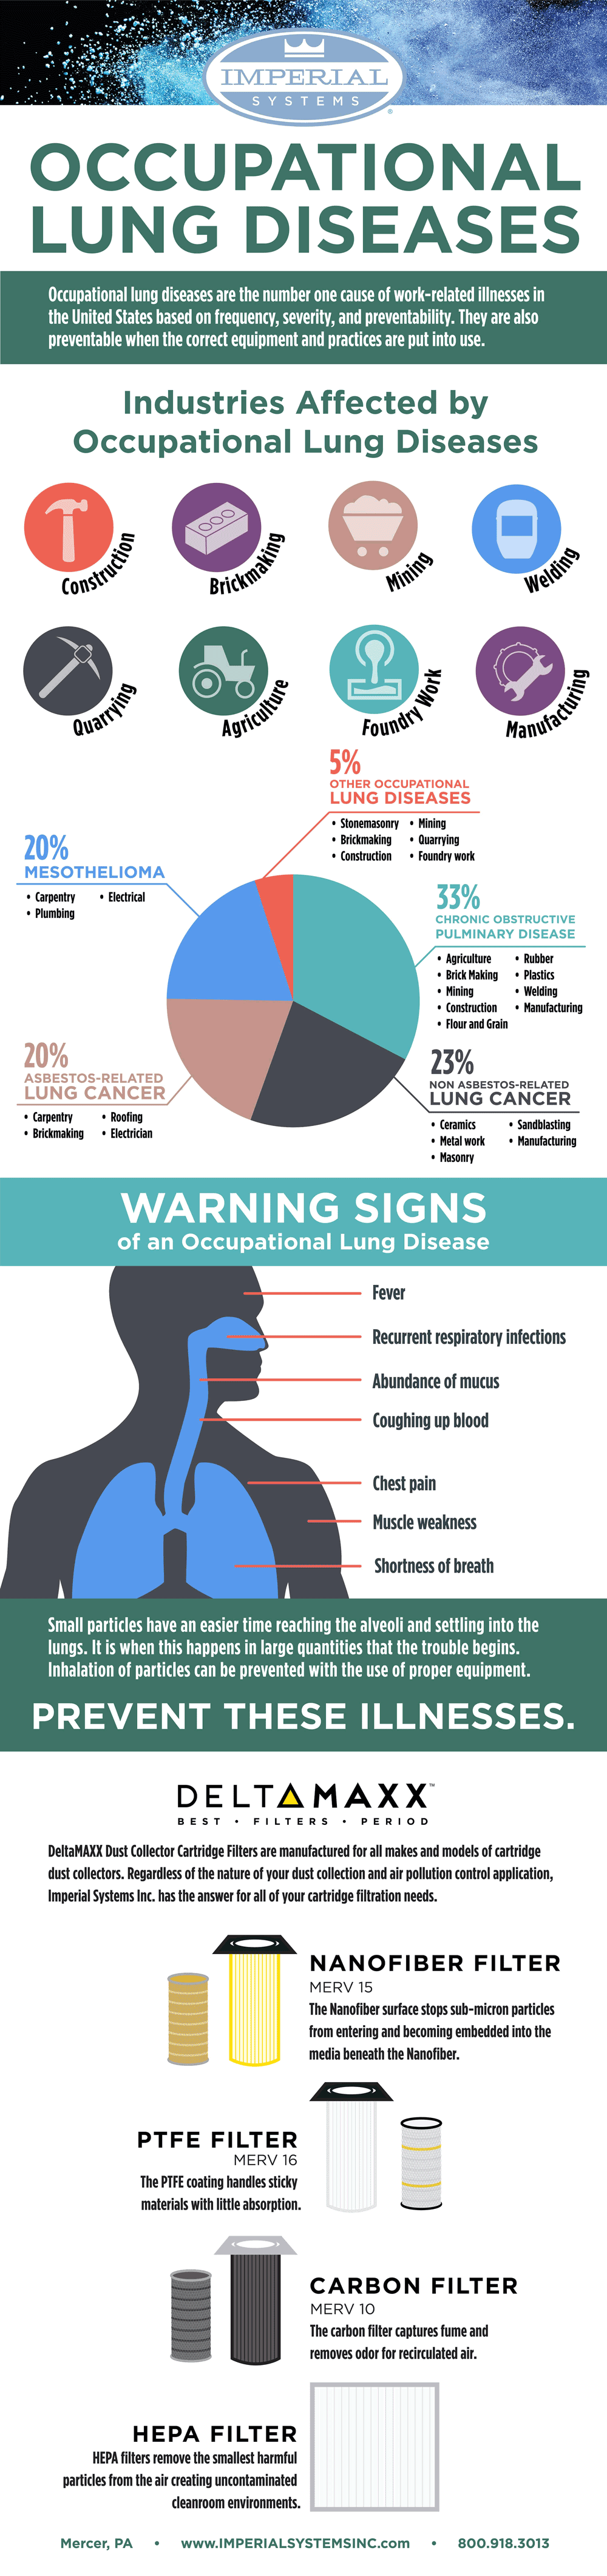 Infographic of Occupational Lung Diseases and how a Imperial Systems Dust Collector can help